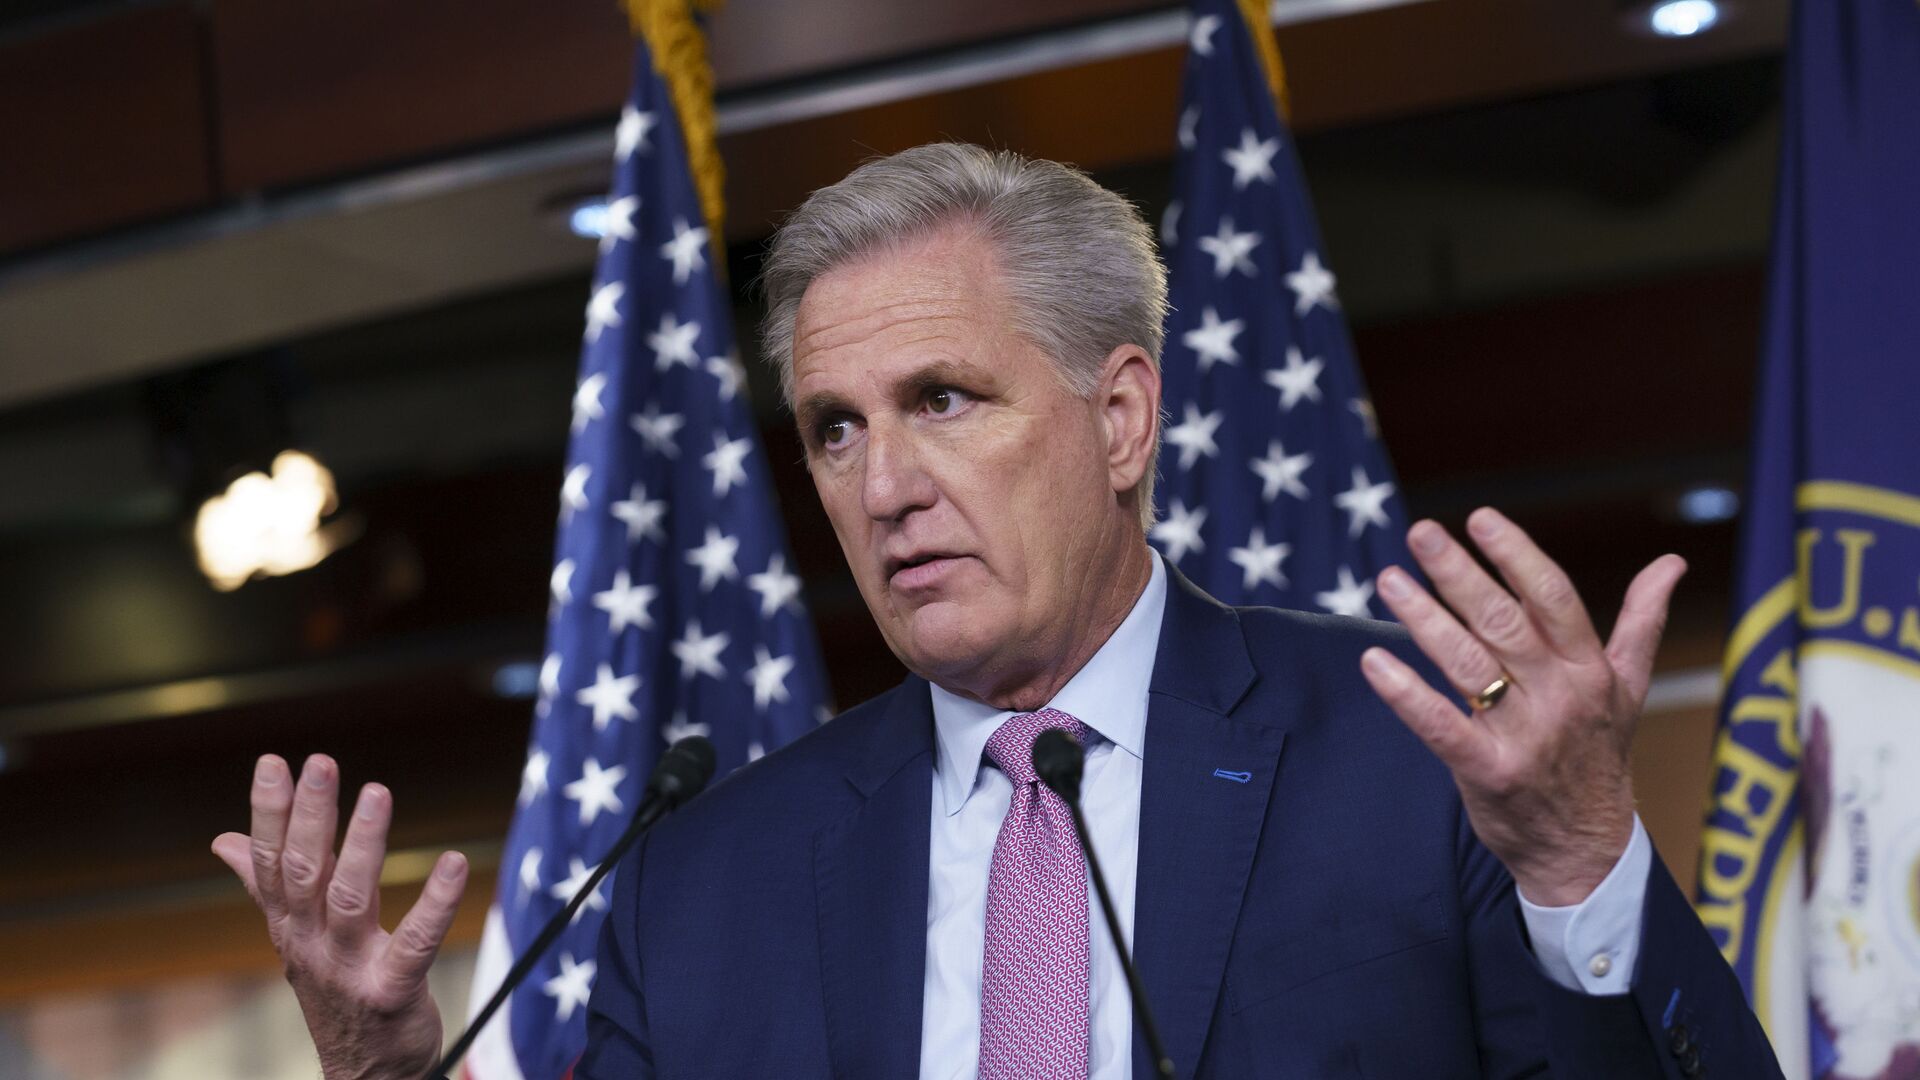 House Minority Leader Kevin McCarthy, R-Calif., takes questions at a news conference prior to meeting with police officers injured in the Jan. 6 attack on Congress, at the Capitol in Washington, Friday, June 25, 2021. - Sputnik International, 1920, 12.01.2022